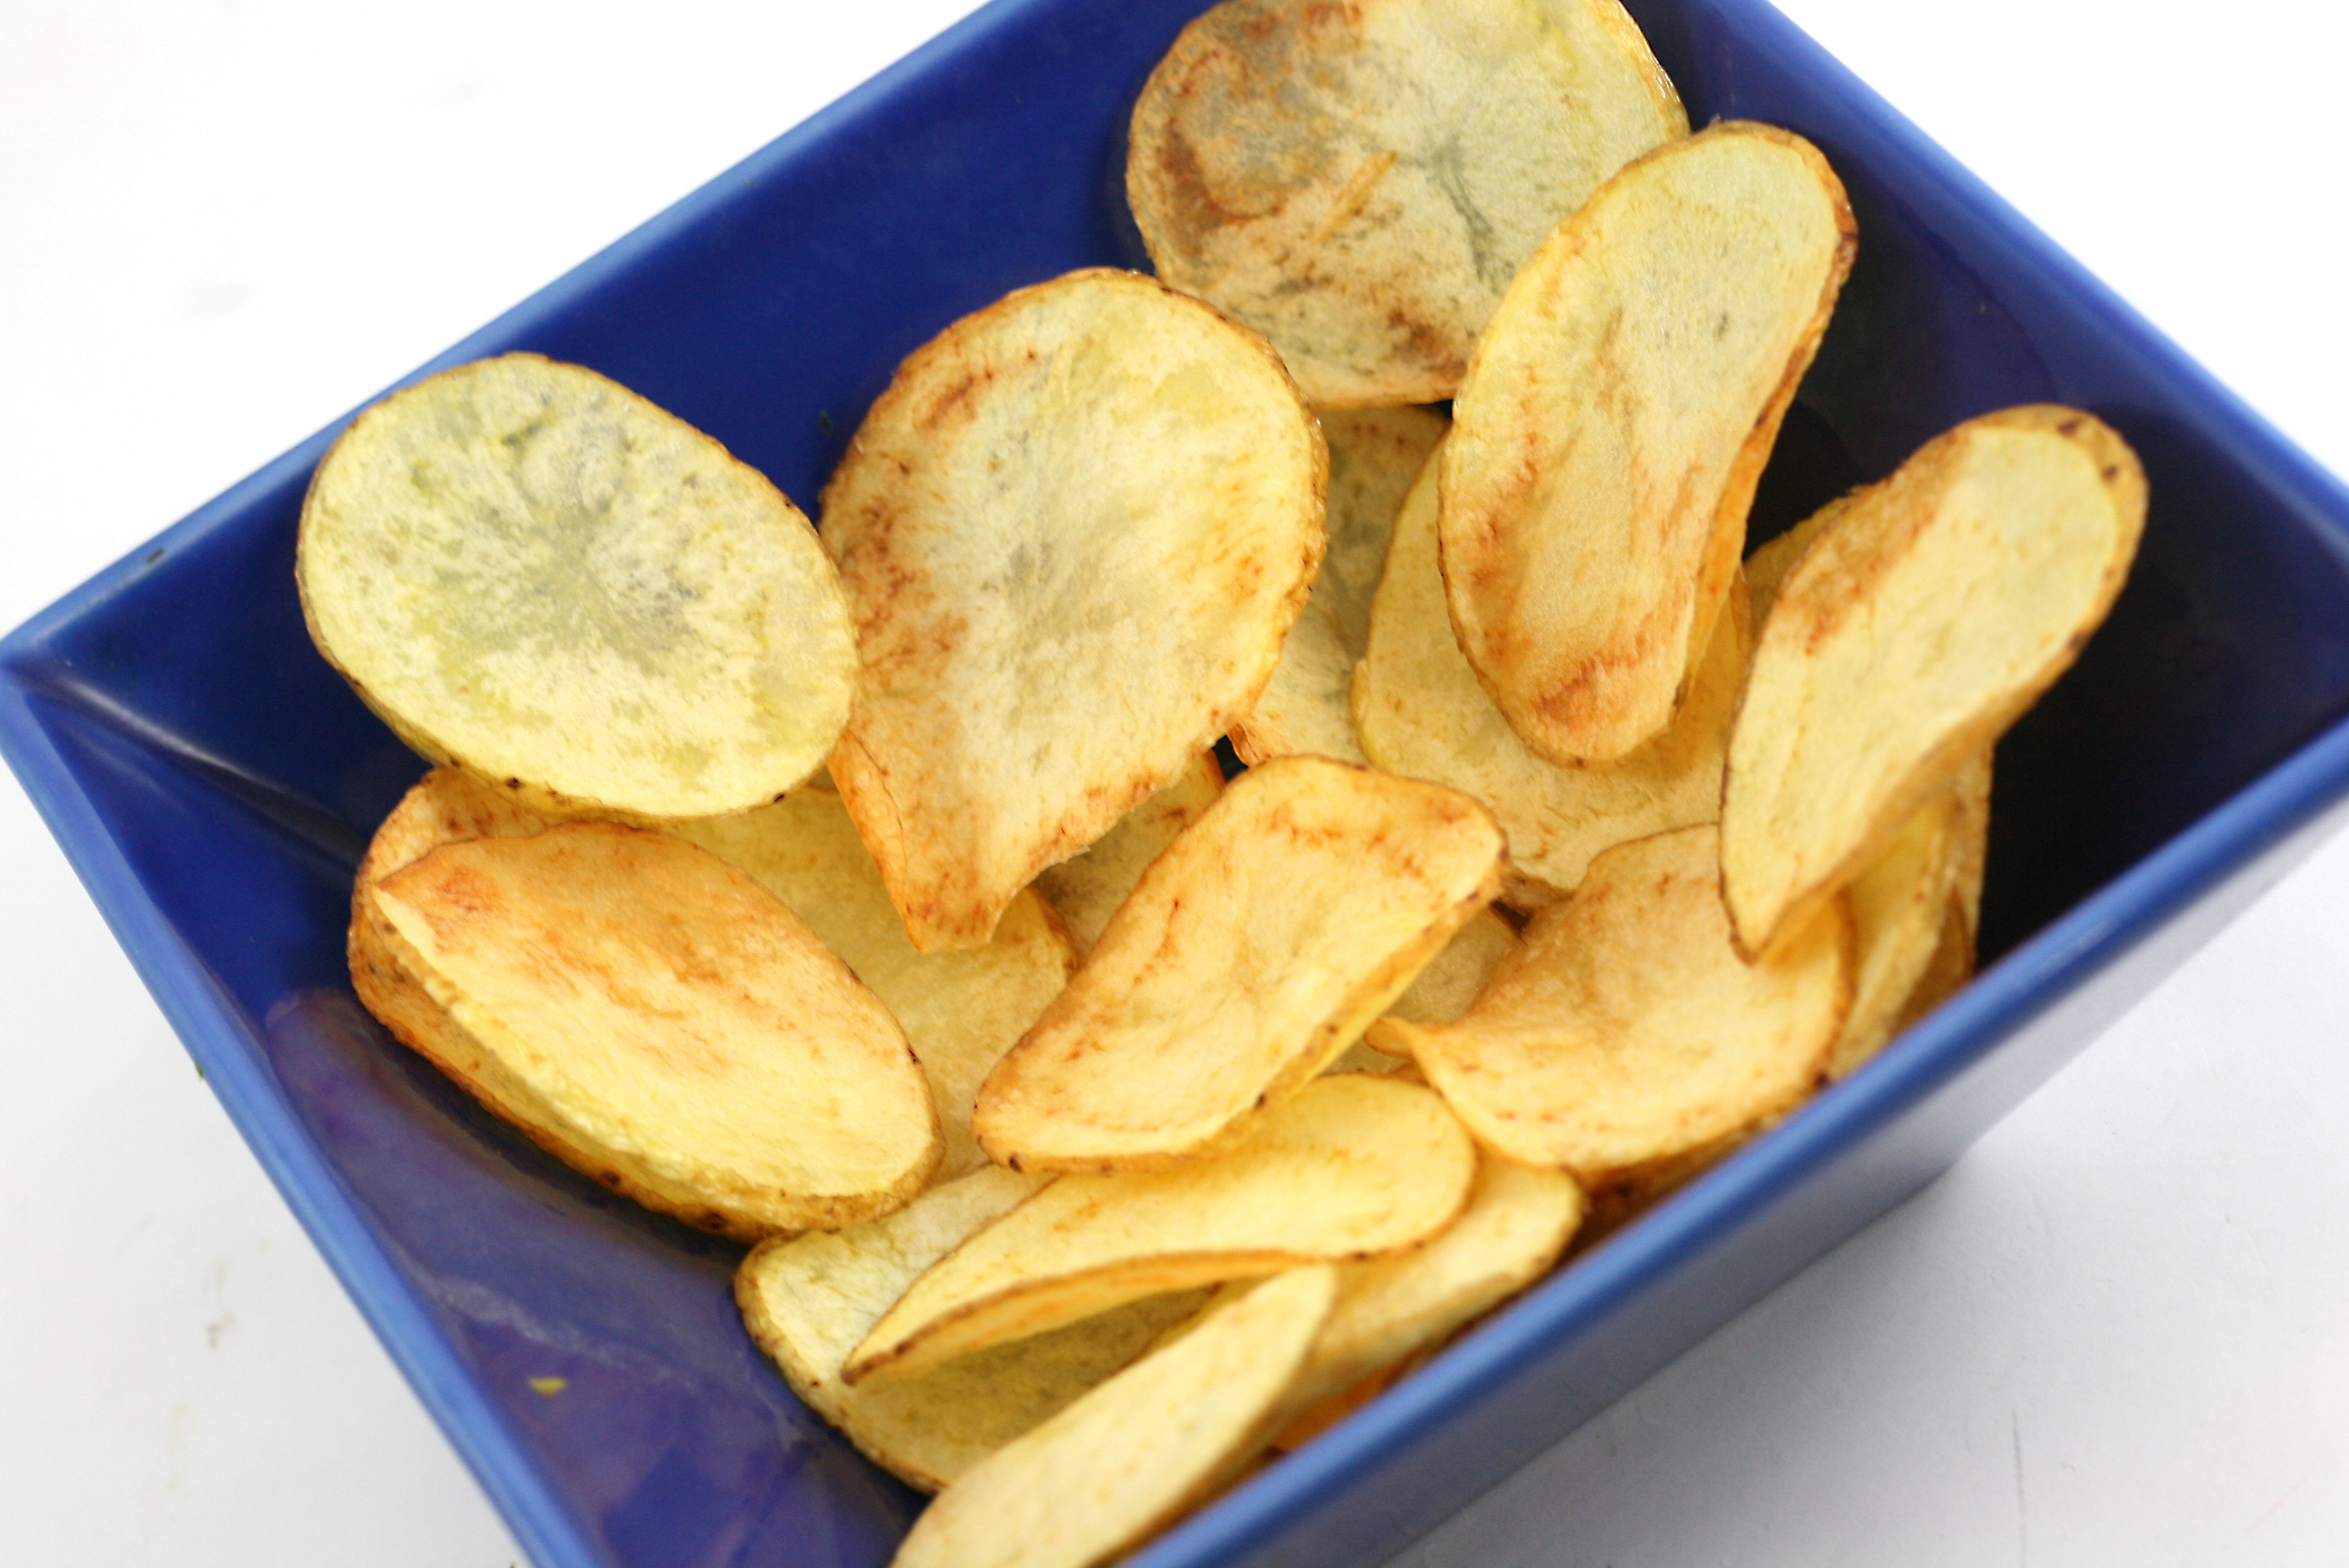 How To Make Potato Chips
 How to Make Potato Chips Using Safflower Oil 7 Steps